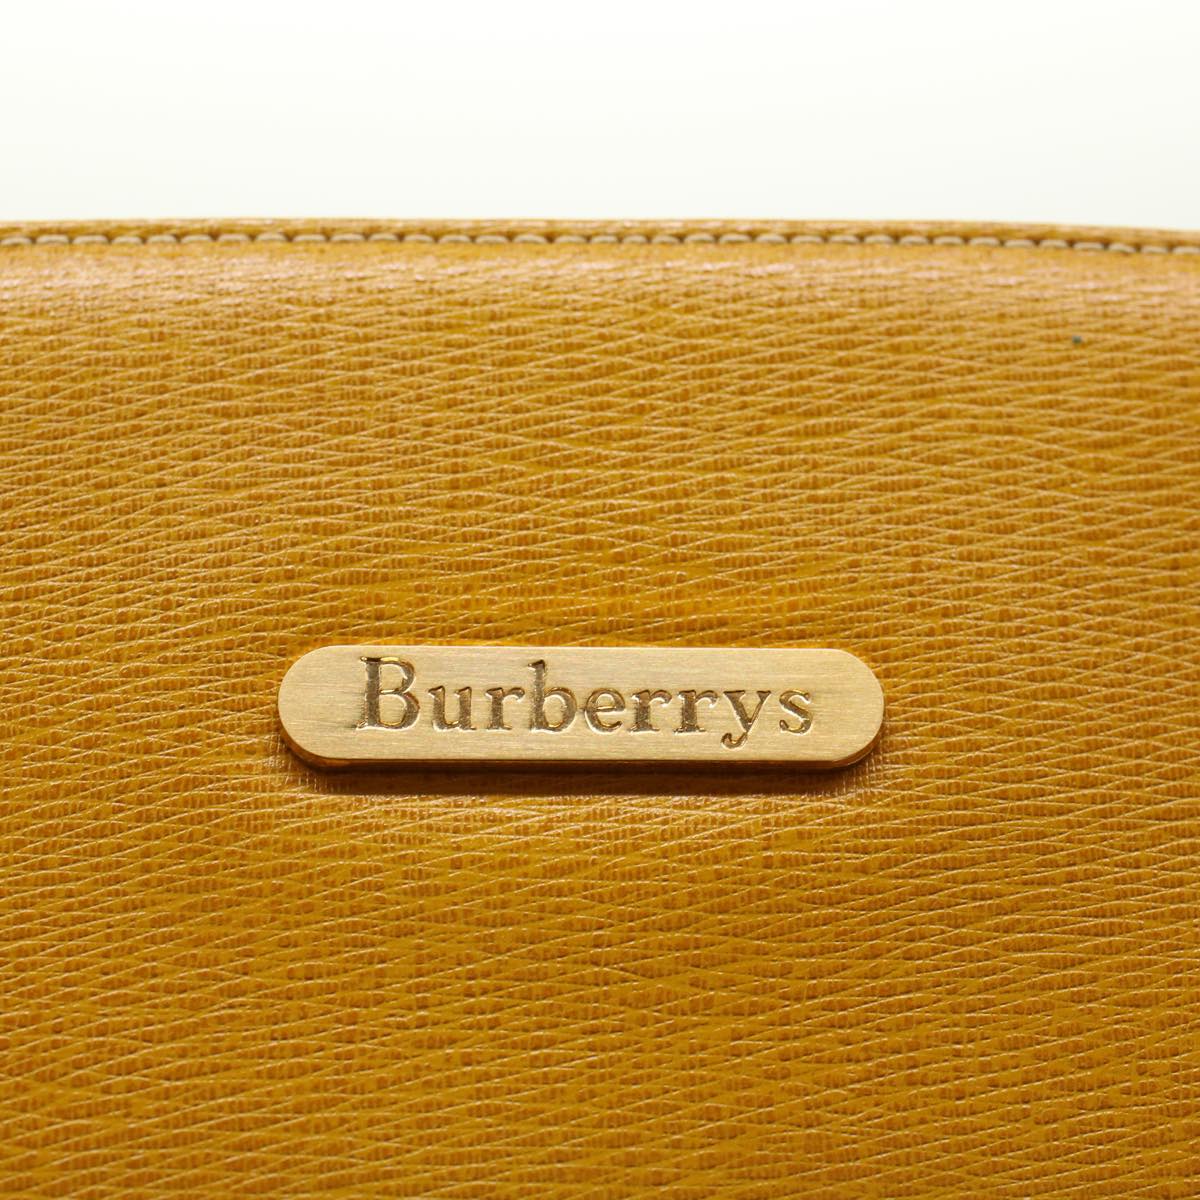 Burberrys Shoulder Bag Leather Yellow Auth bs7351